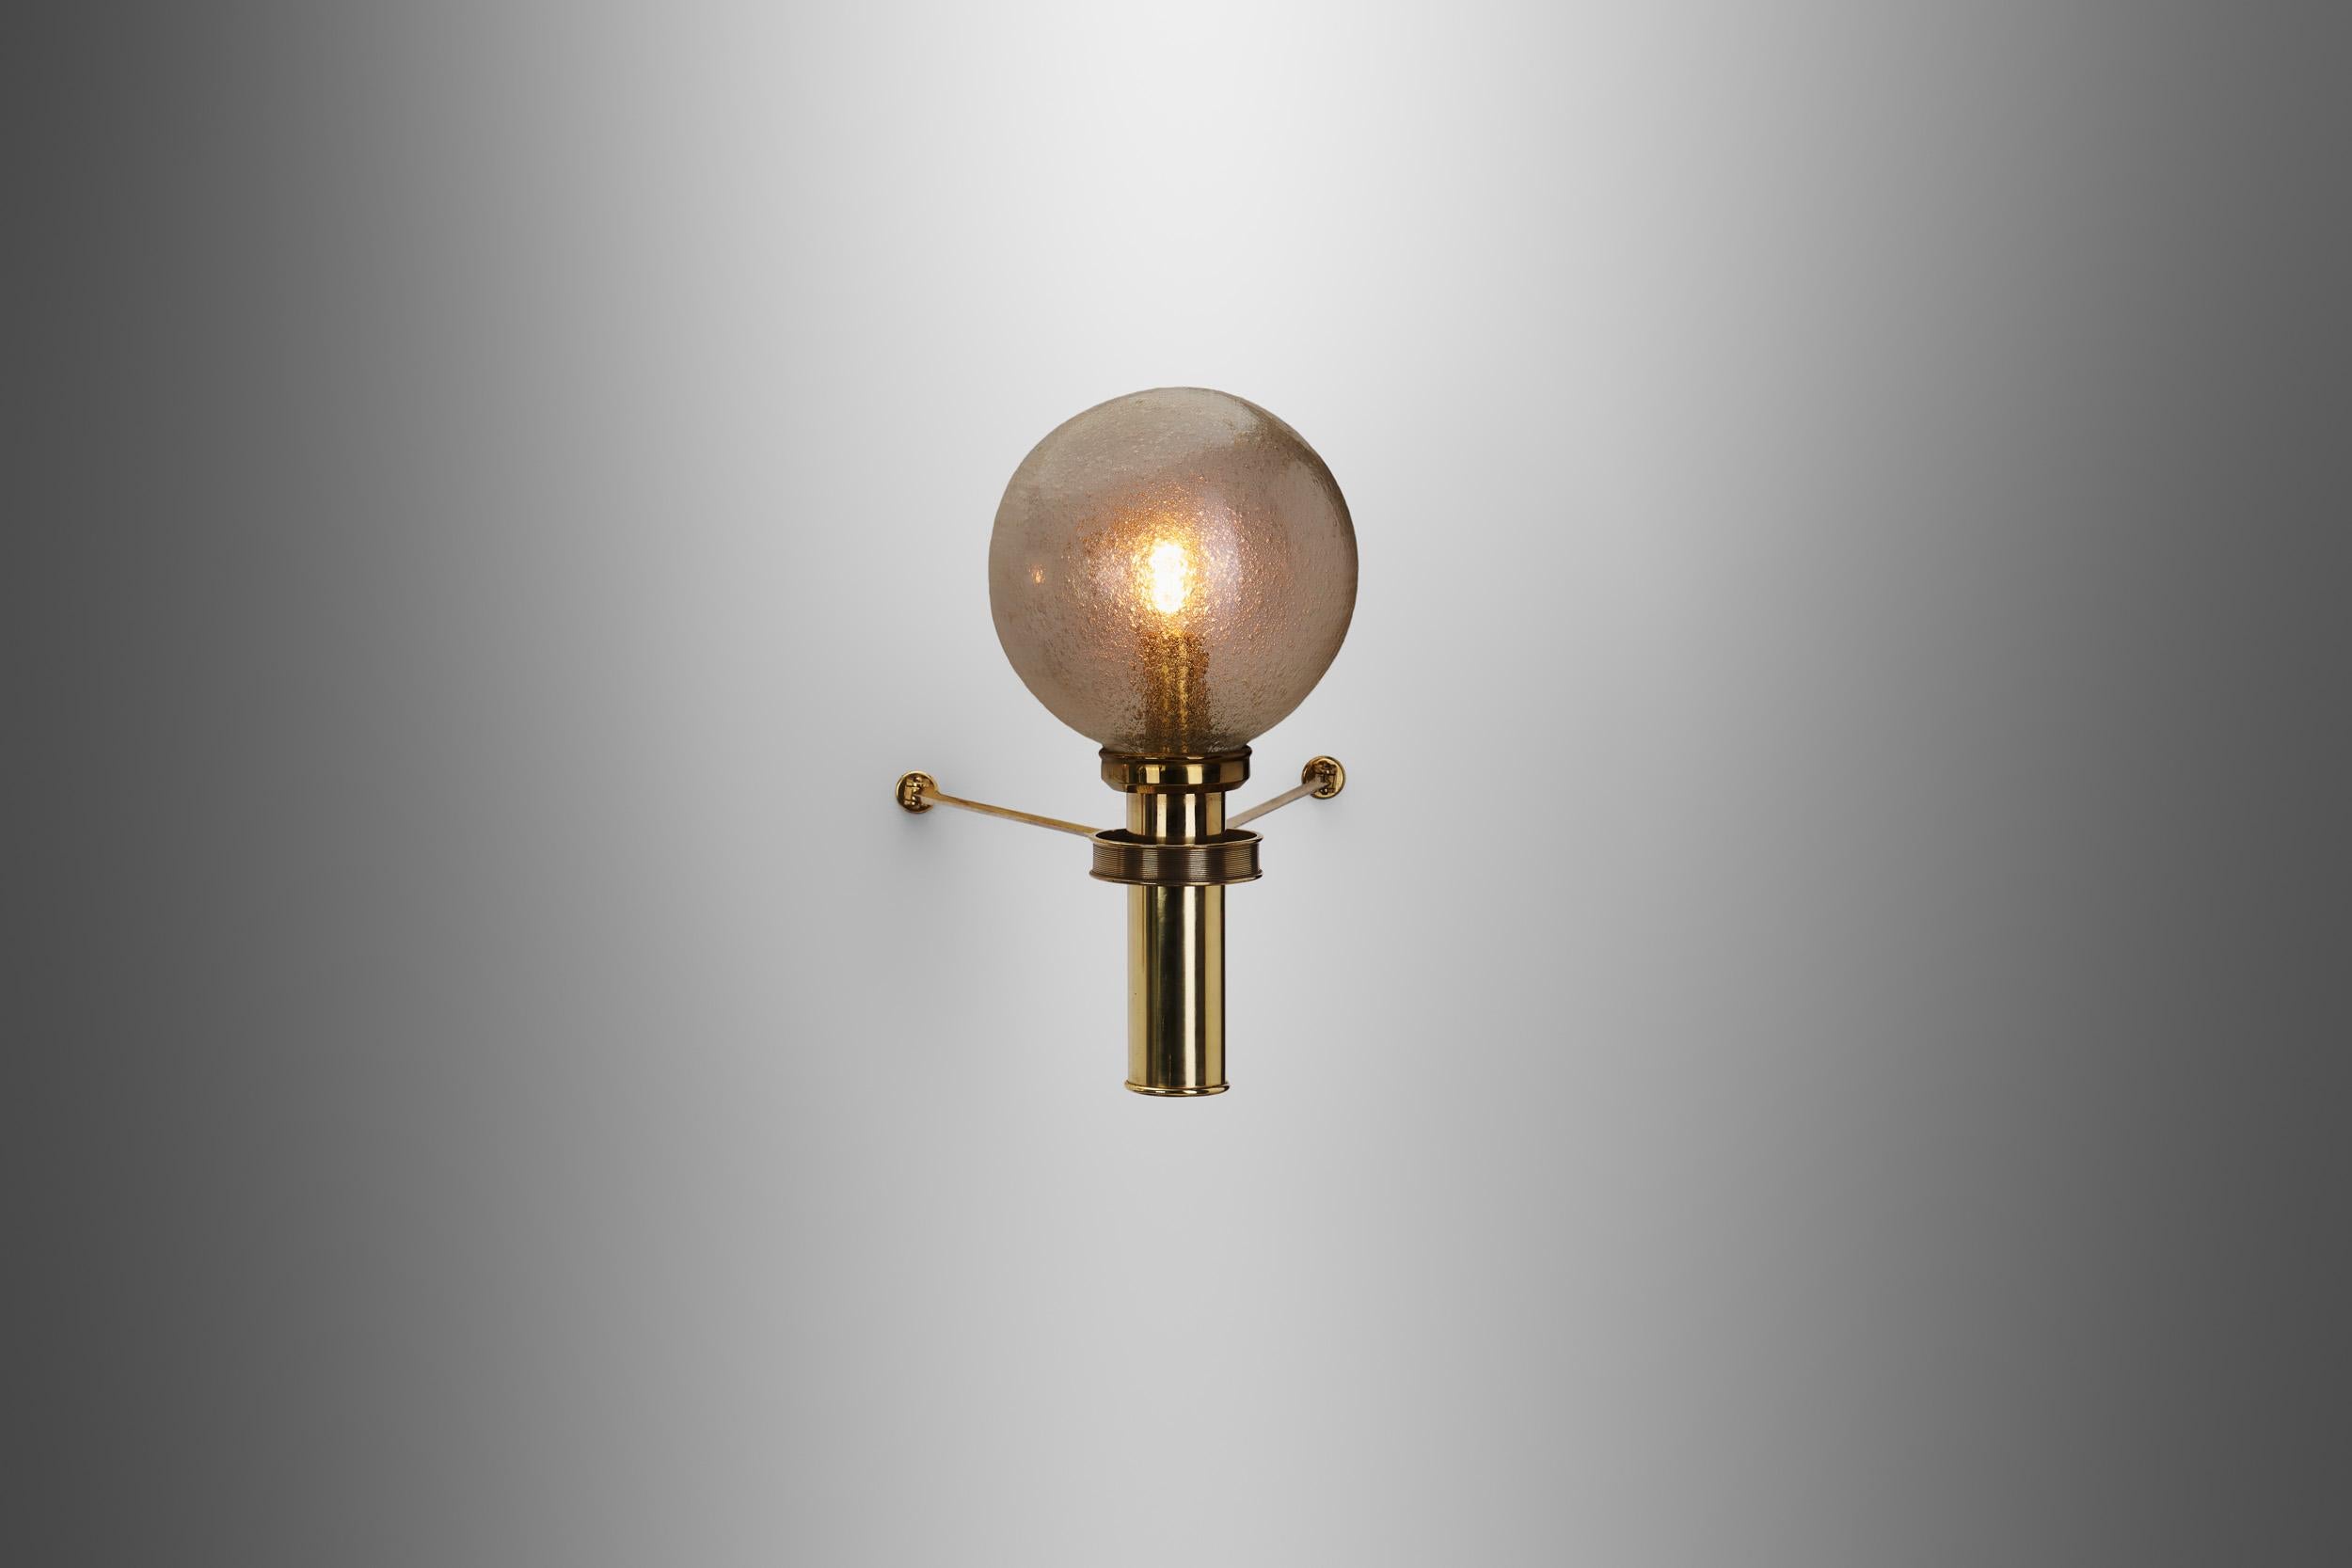 Large European Modern Wall Sconce in Brass & Bubble Glass, Europe circa 1950s In Good Condition For Sale In Utrecht, NL